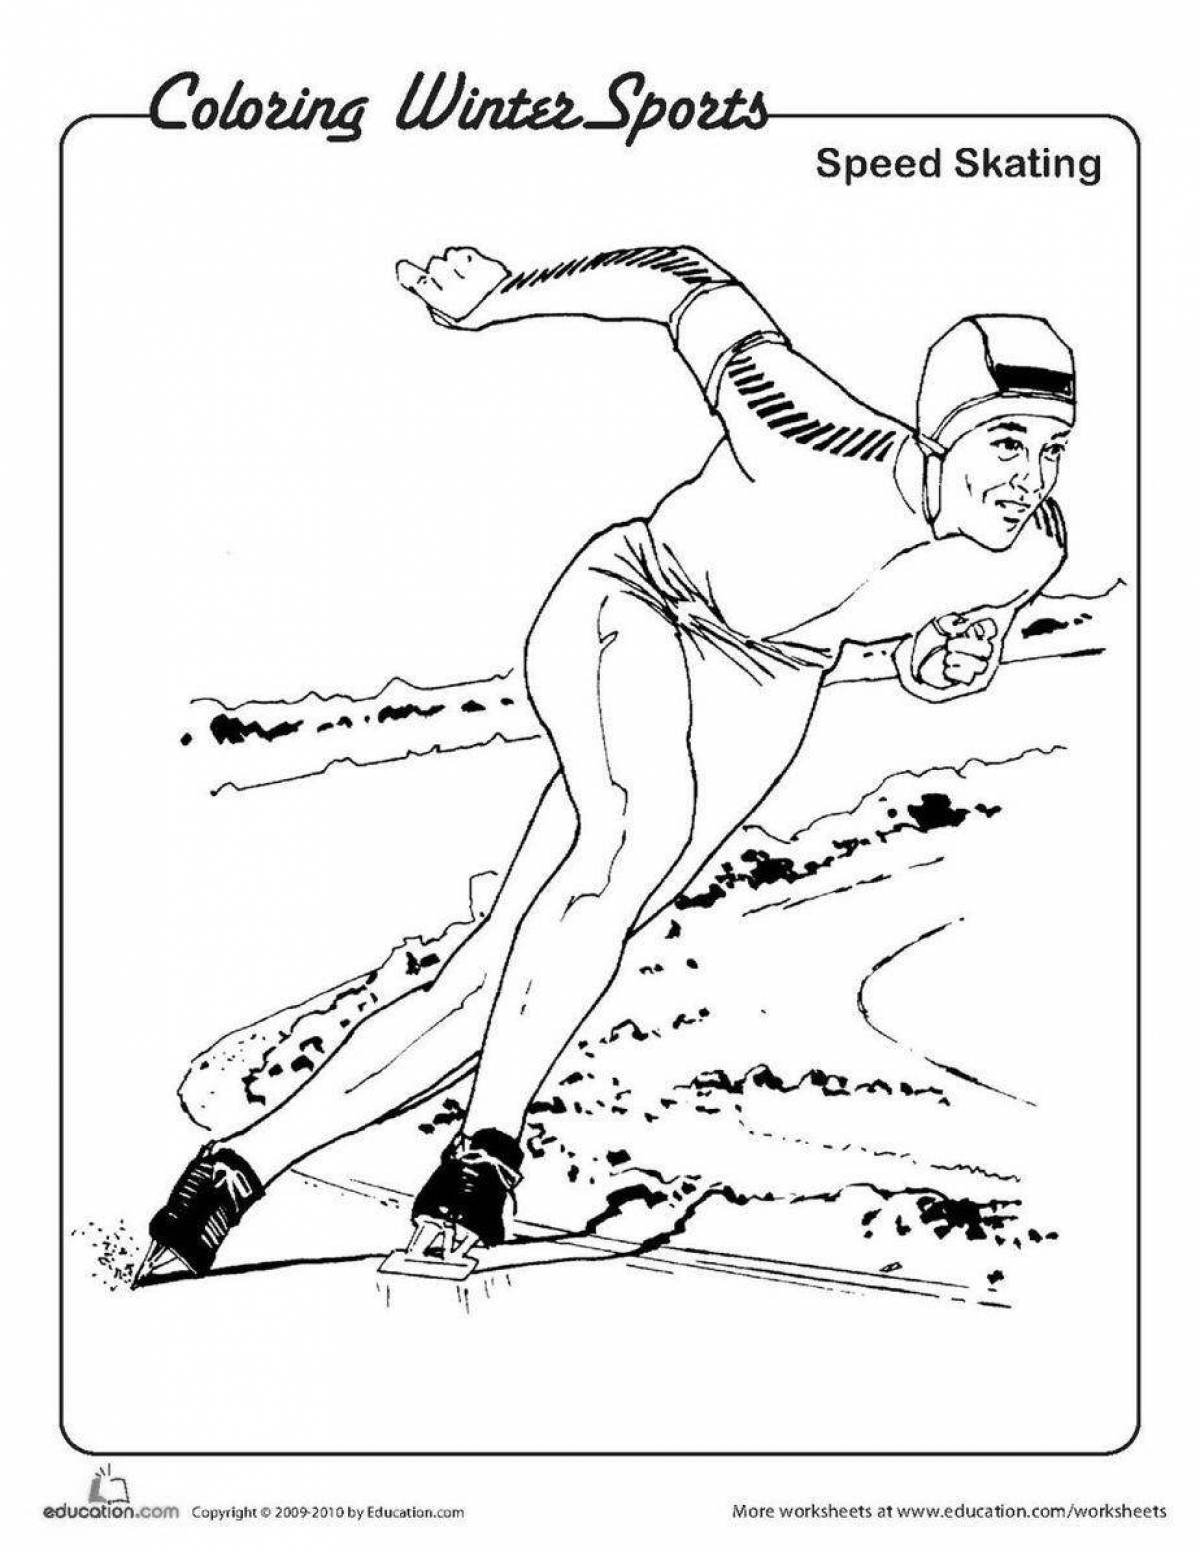 Coloring page of a sociable skater